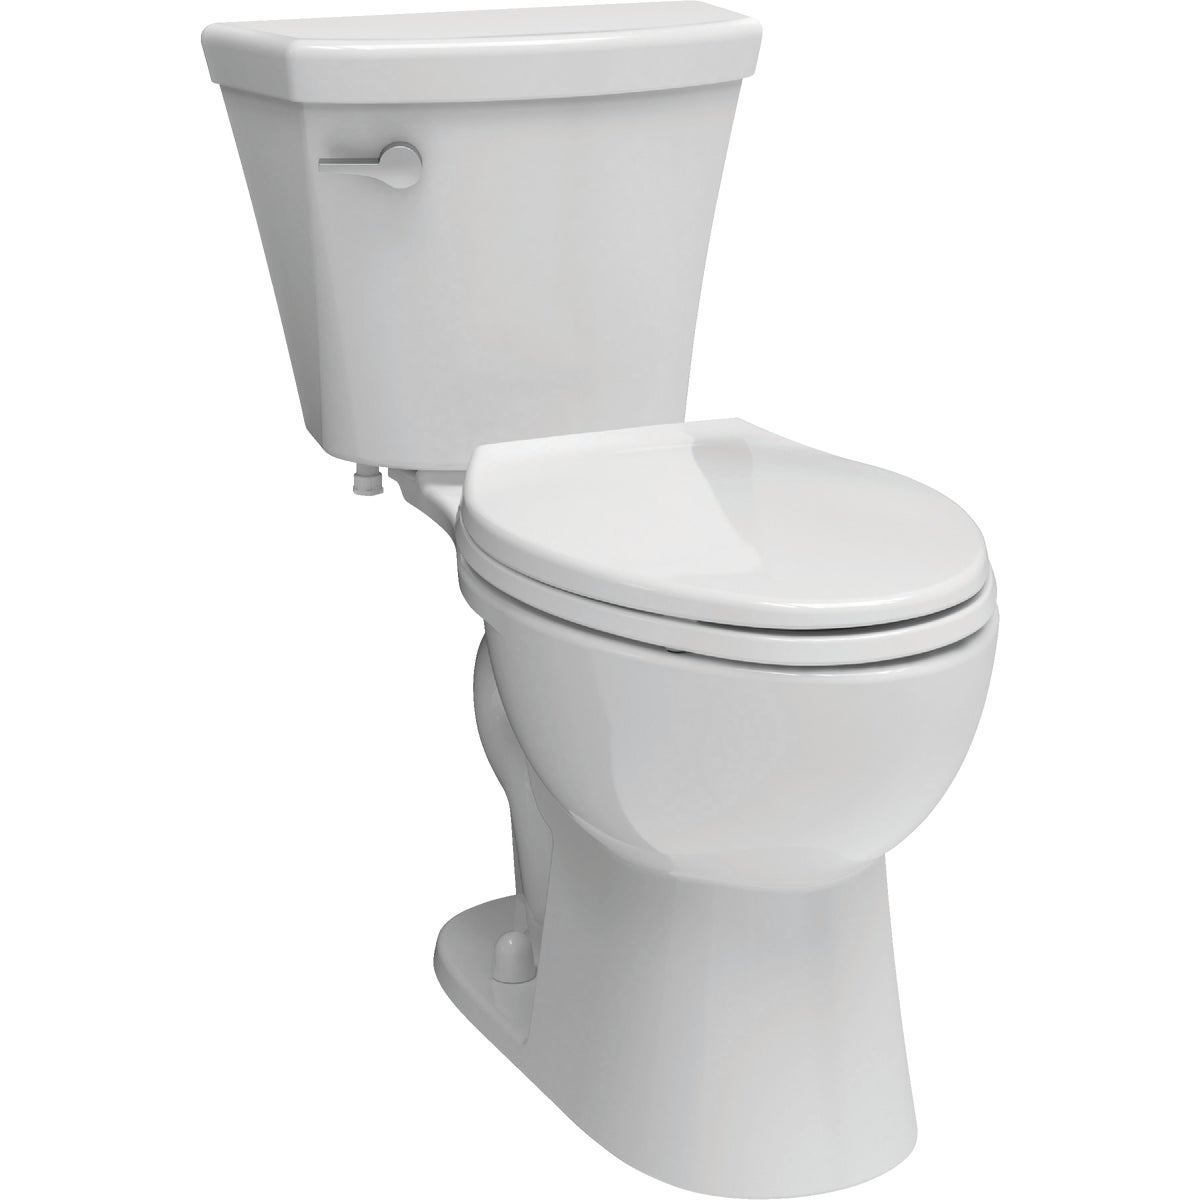 Item 401879, This Turner 2-Piece Elongated Toilet is beautifully designed for easy 